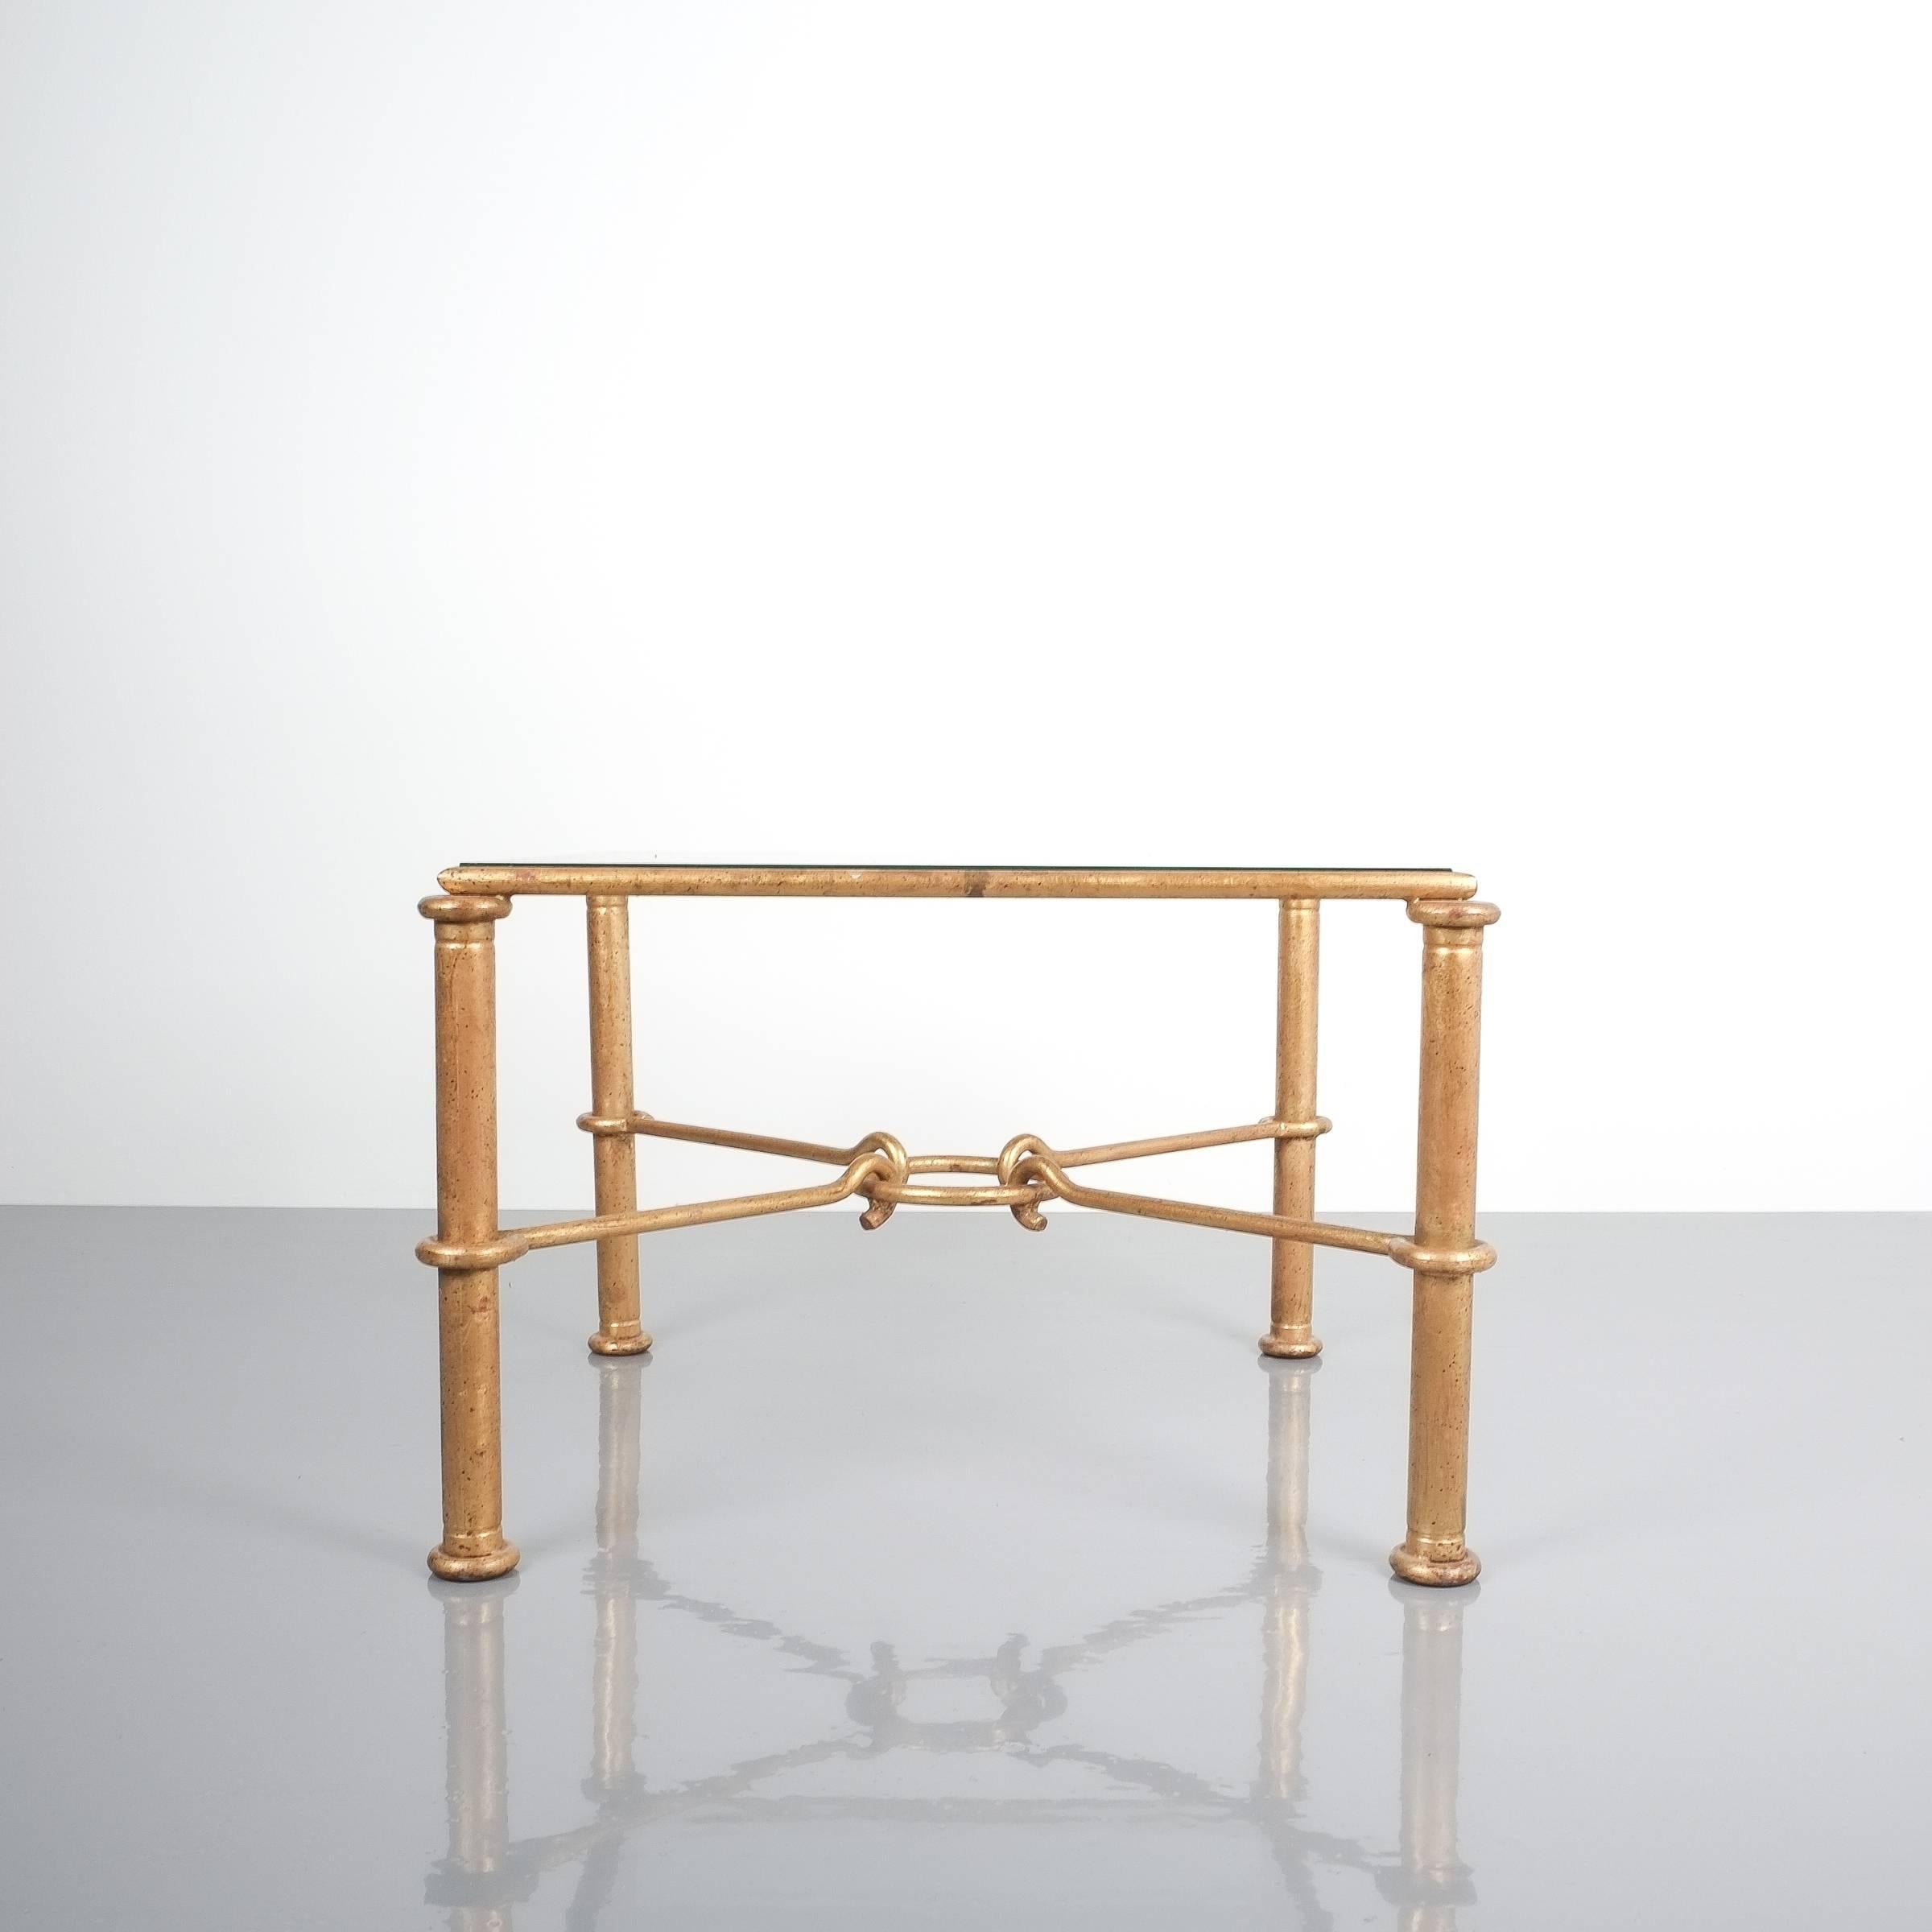 Mid-Century Modern Rene Drouet Attributed Pair of Gilt Iron Side Tables, France, 1950